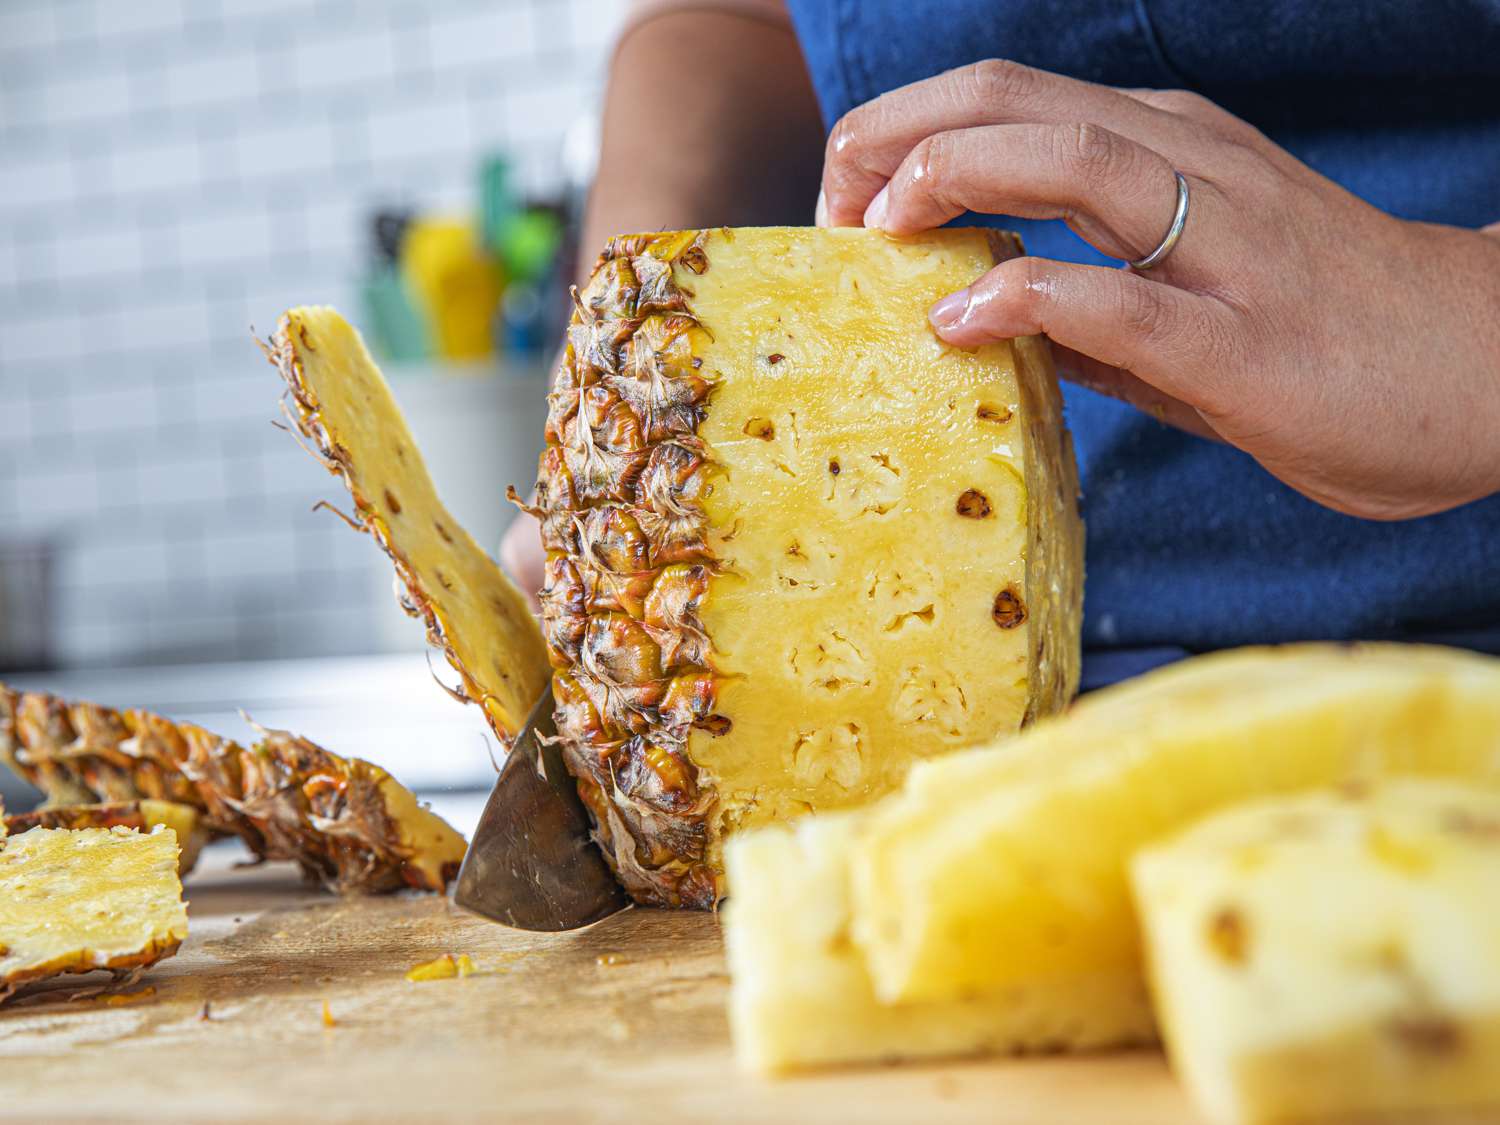 Cutting off the skin of a pineapple